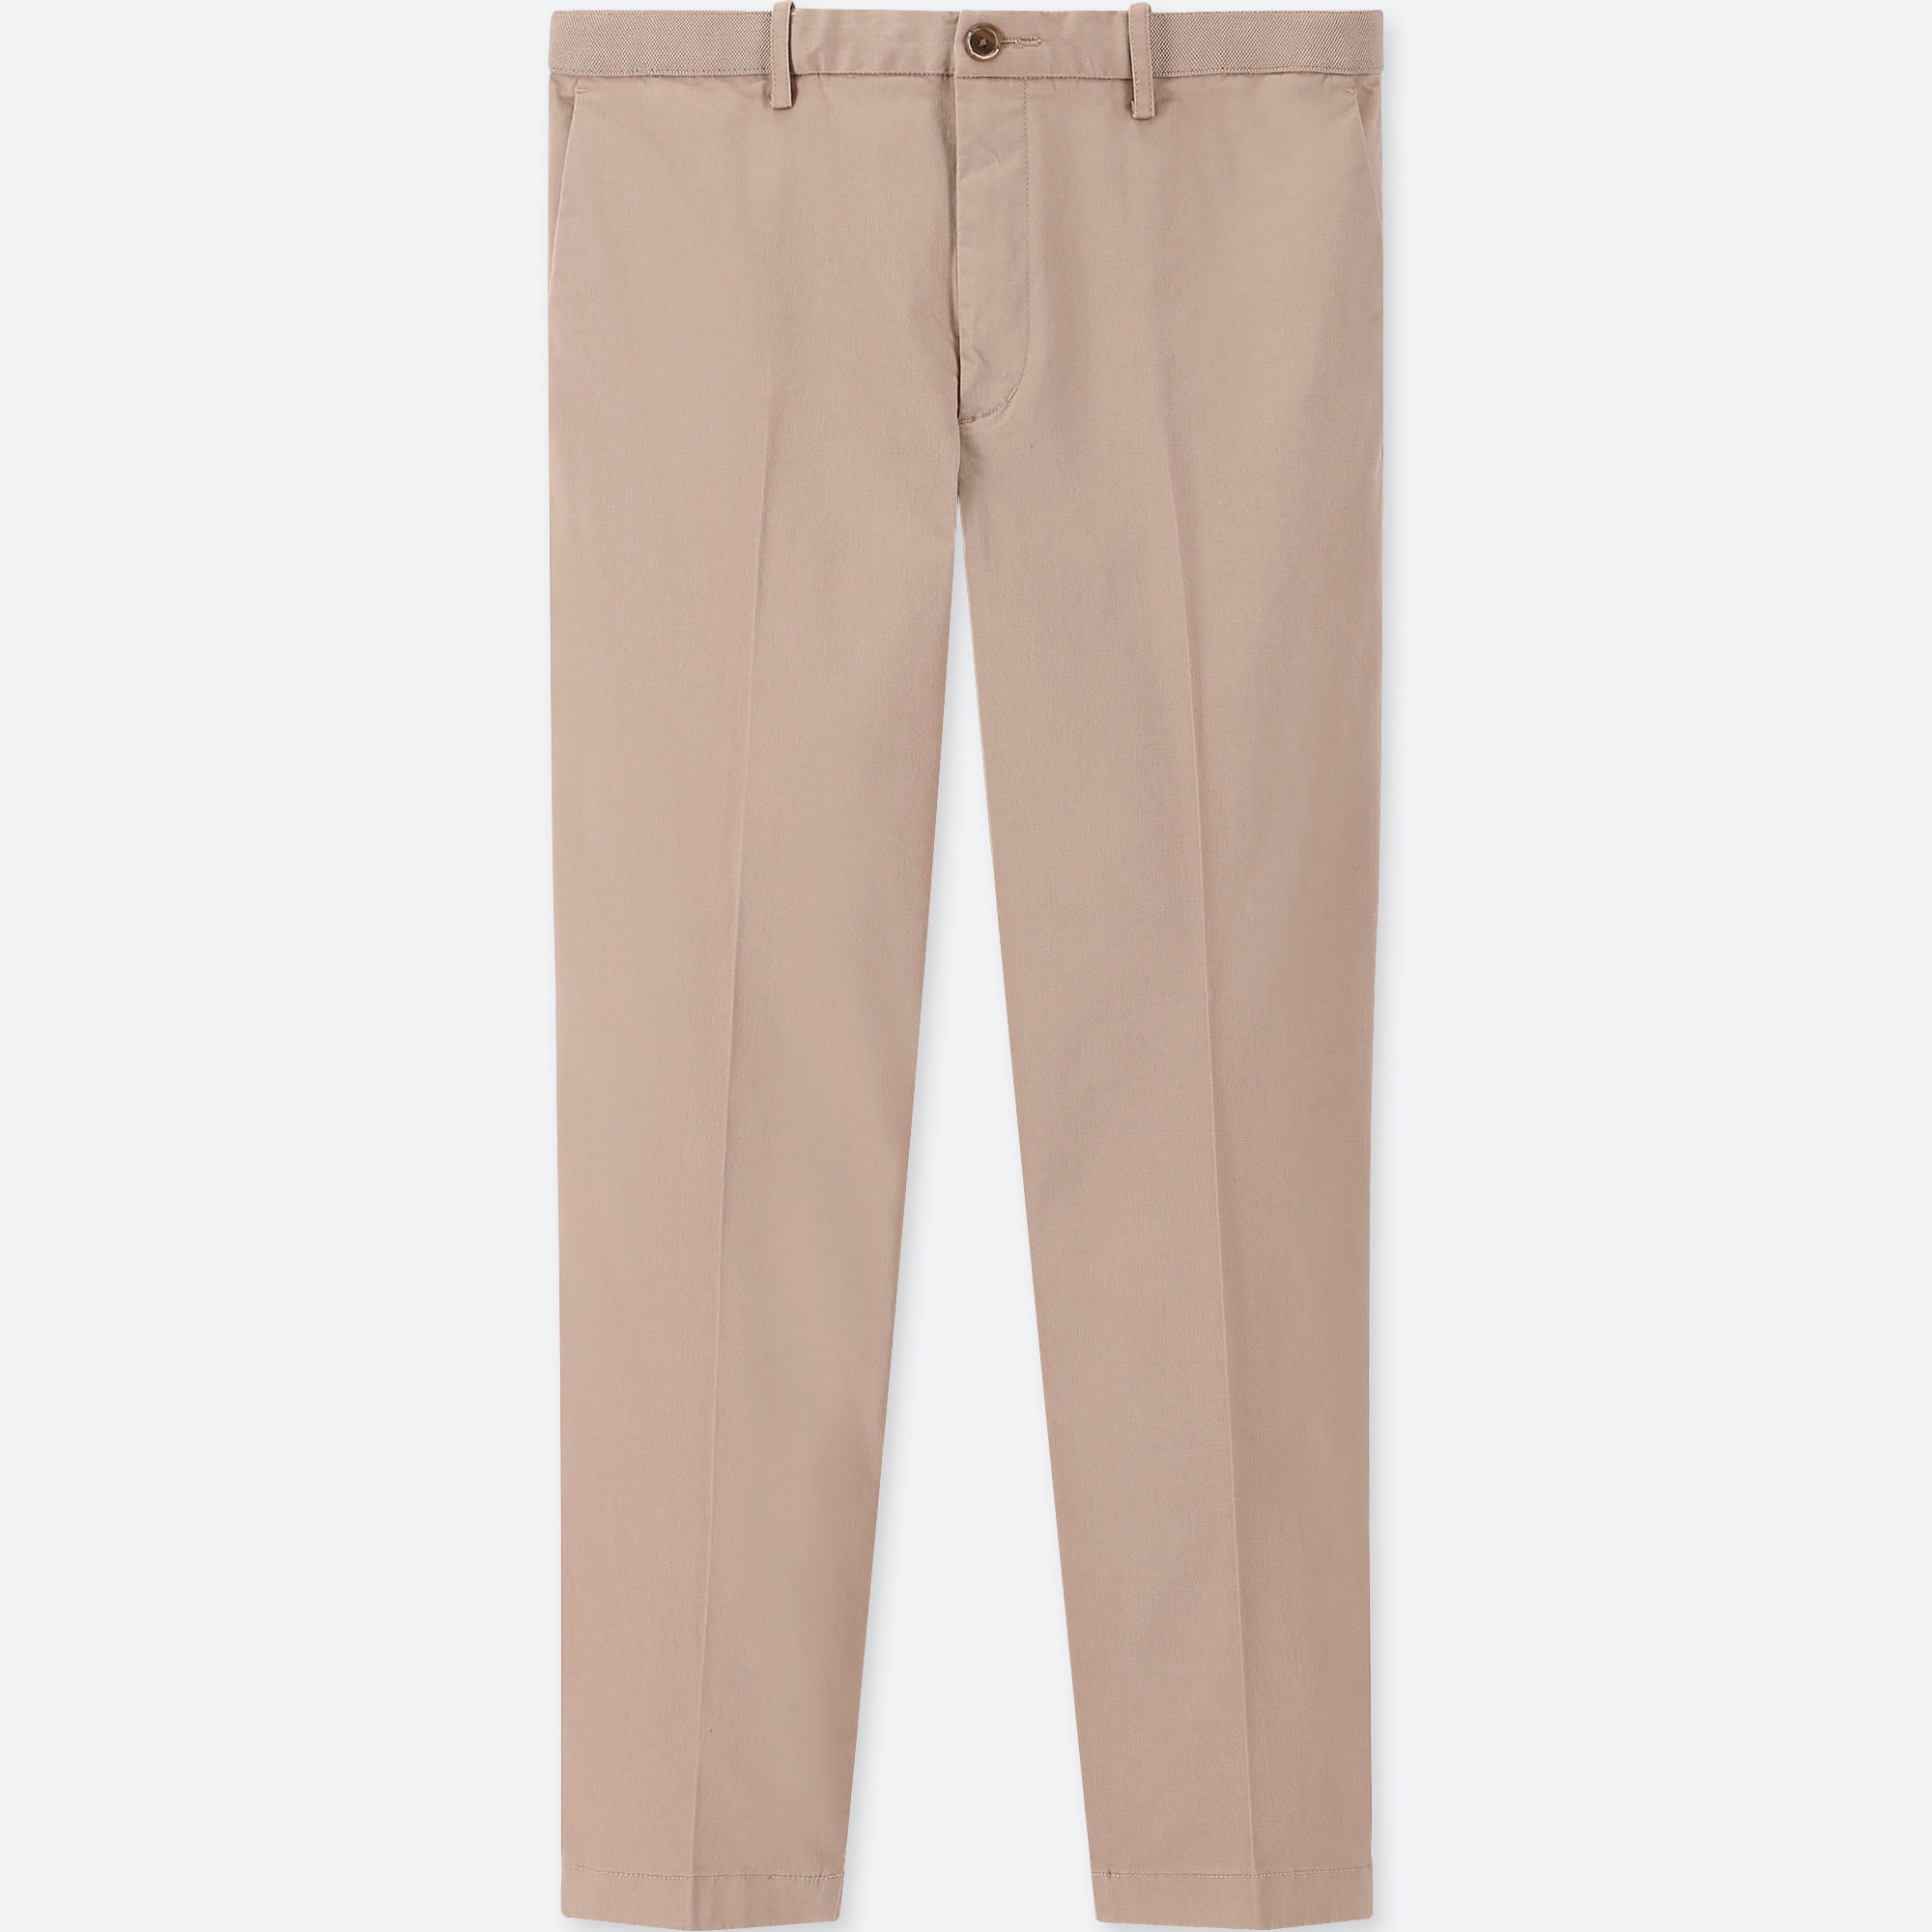 Uniqlo Canada on Twitter Show some ankle show some style Our new  Womens and Mens EZY Ankle Length Pants are the new essential With a  stretch waist and stretch material they look